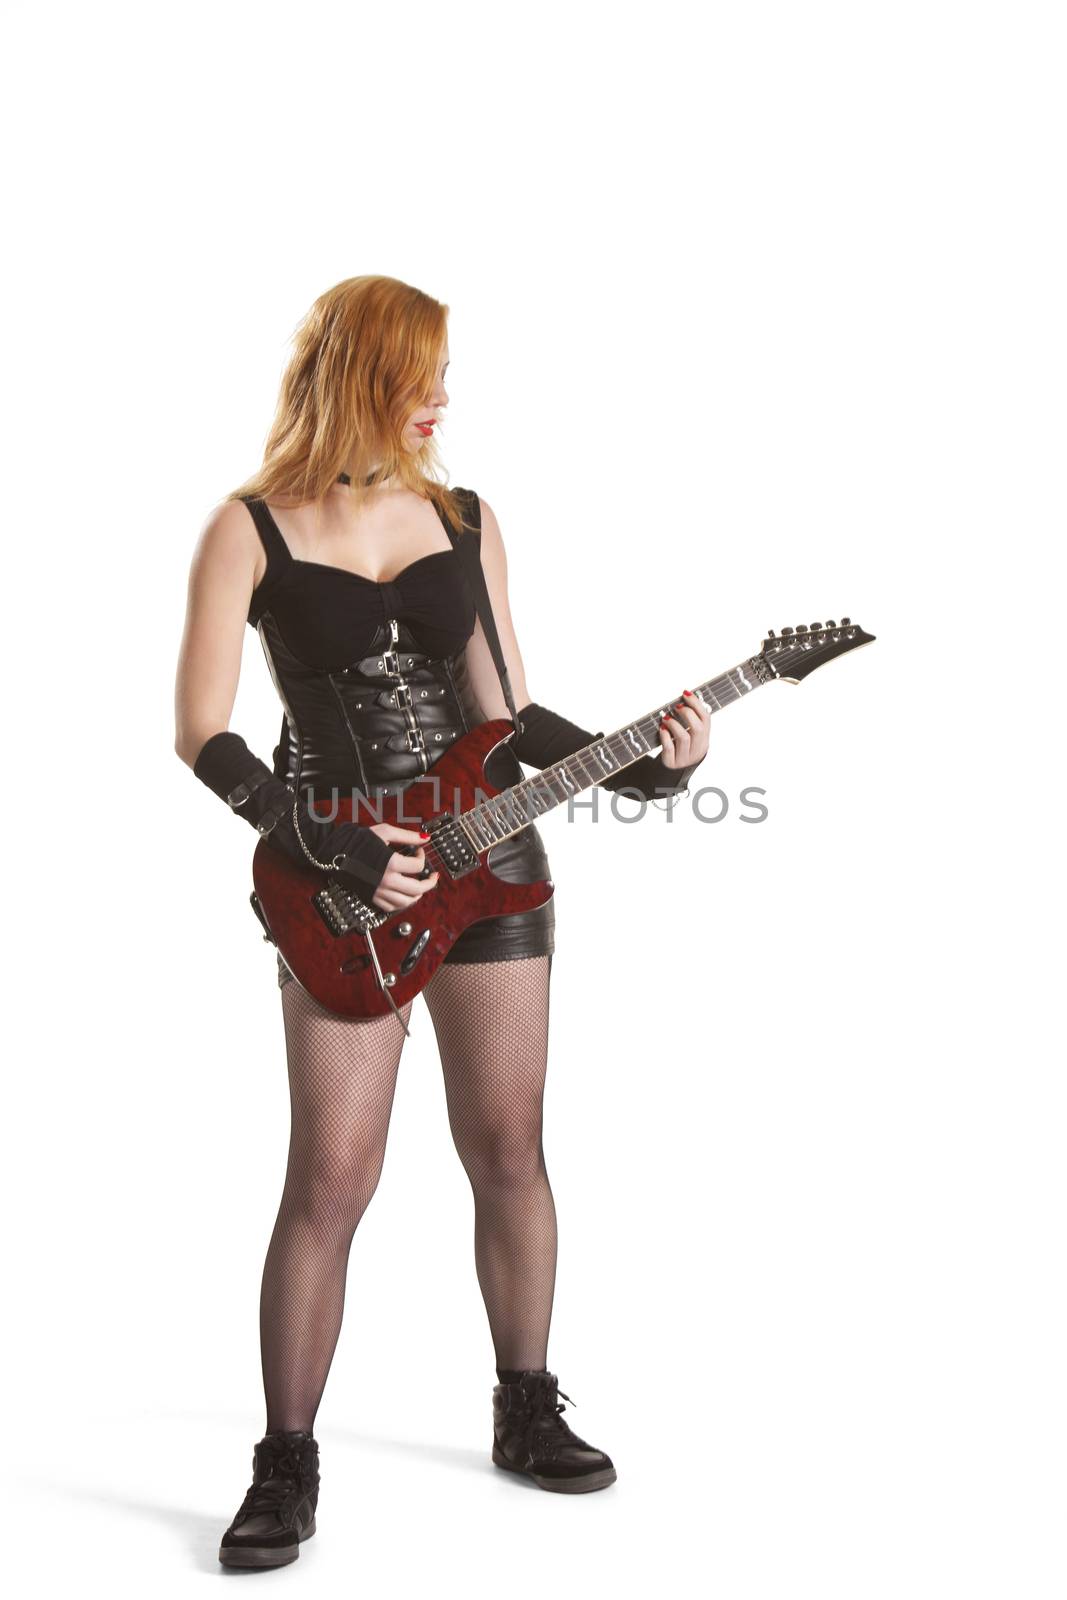 Portrait of young woman playing guitar over white background